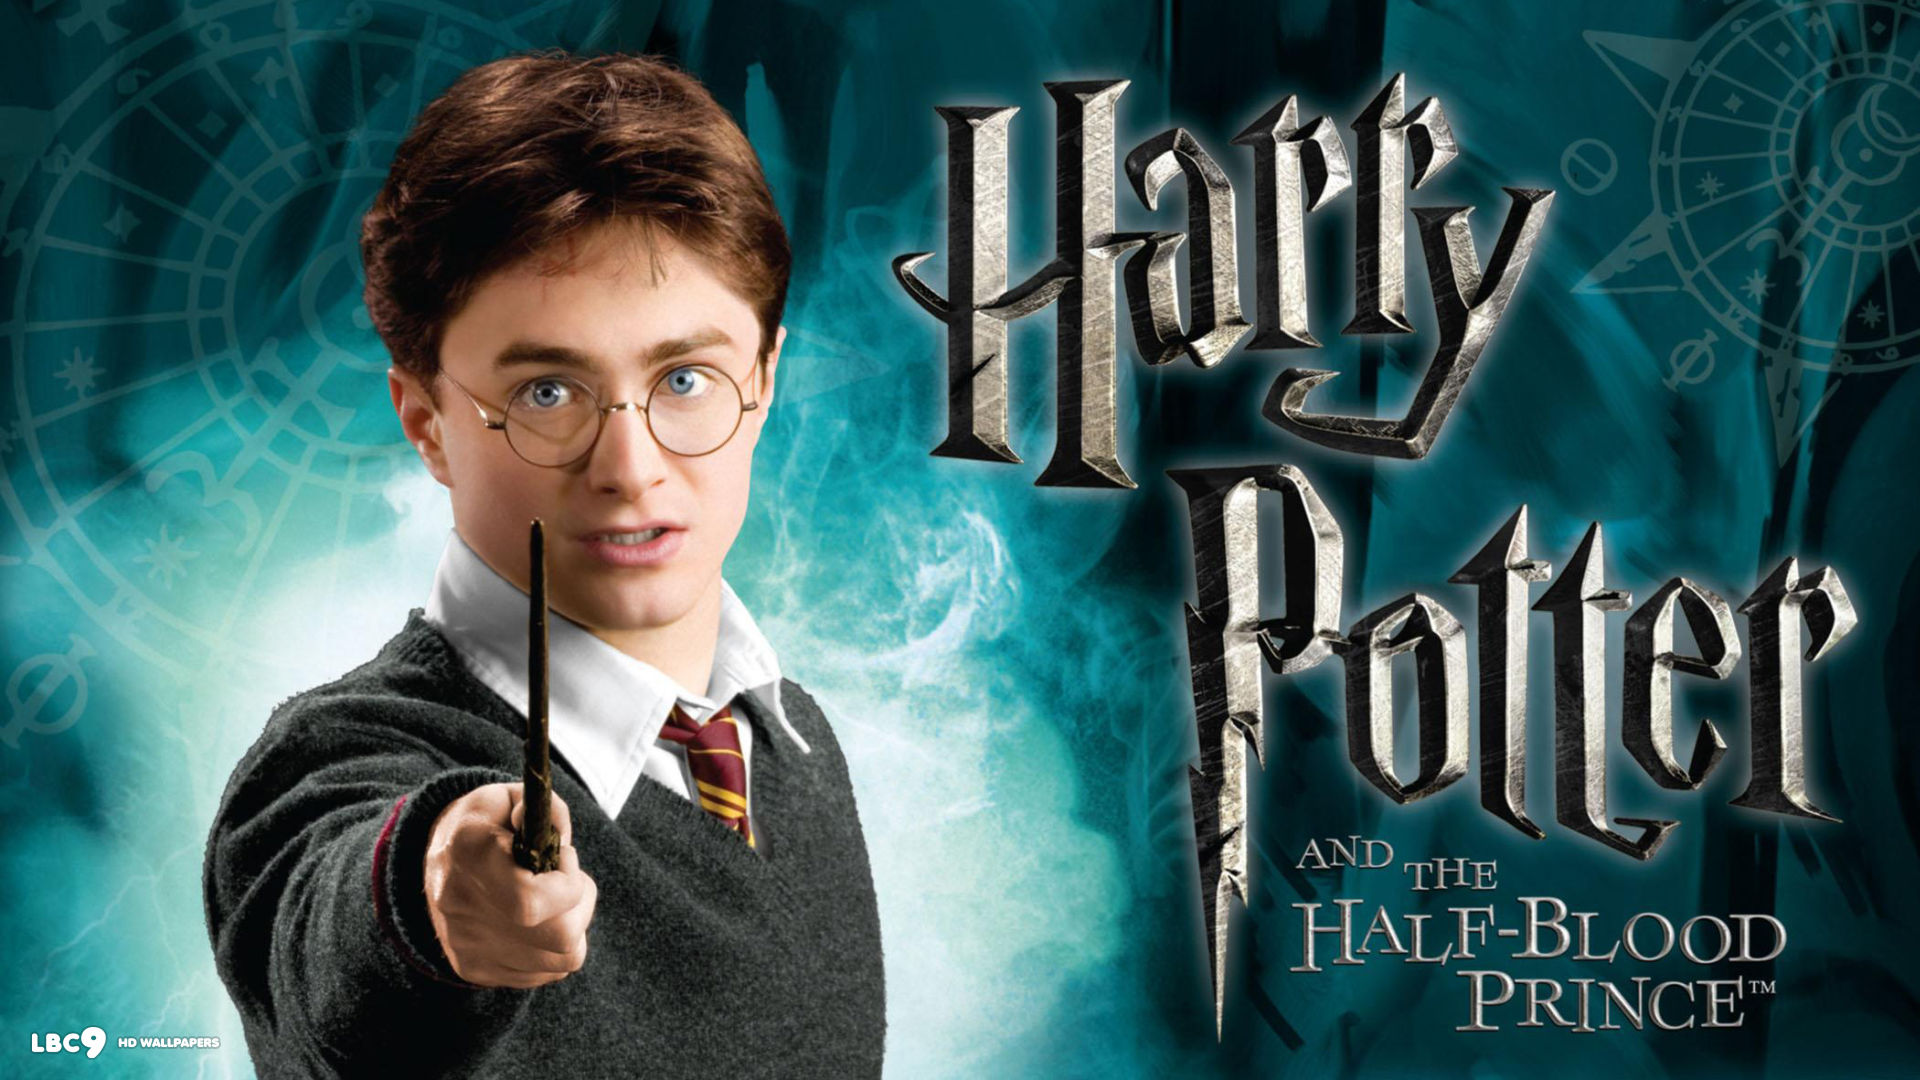 Nice Images Collection: Harry Potter And The Half-blood Prince Desktop Wallpapers